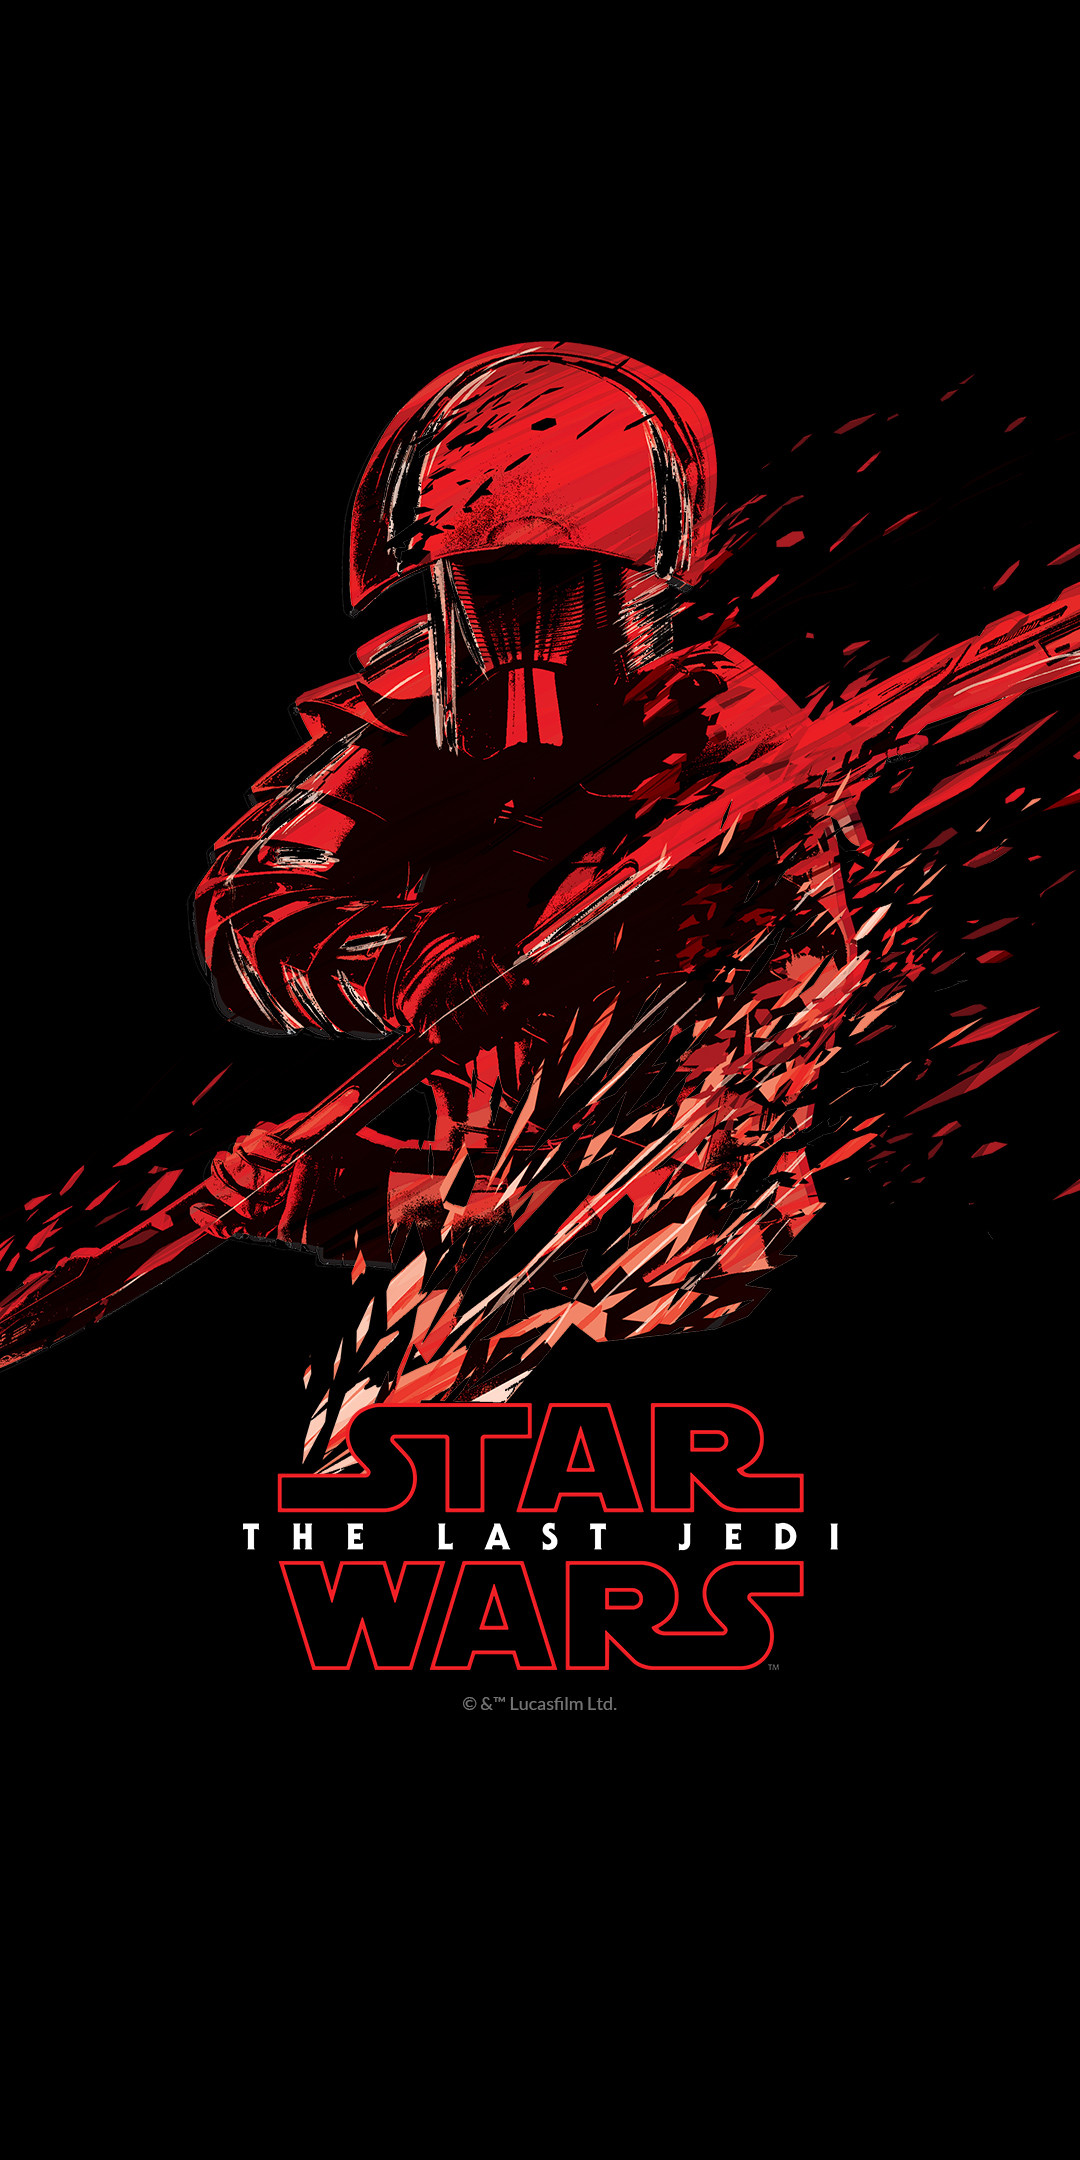 The Wallpapers Are Sized To The Oneplus 5t S Display, - Oneplus 5t Star Wars - HD Wallpaper 